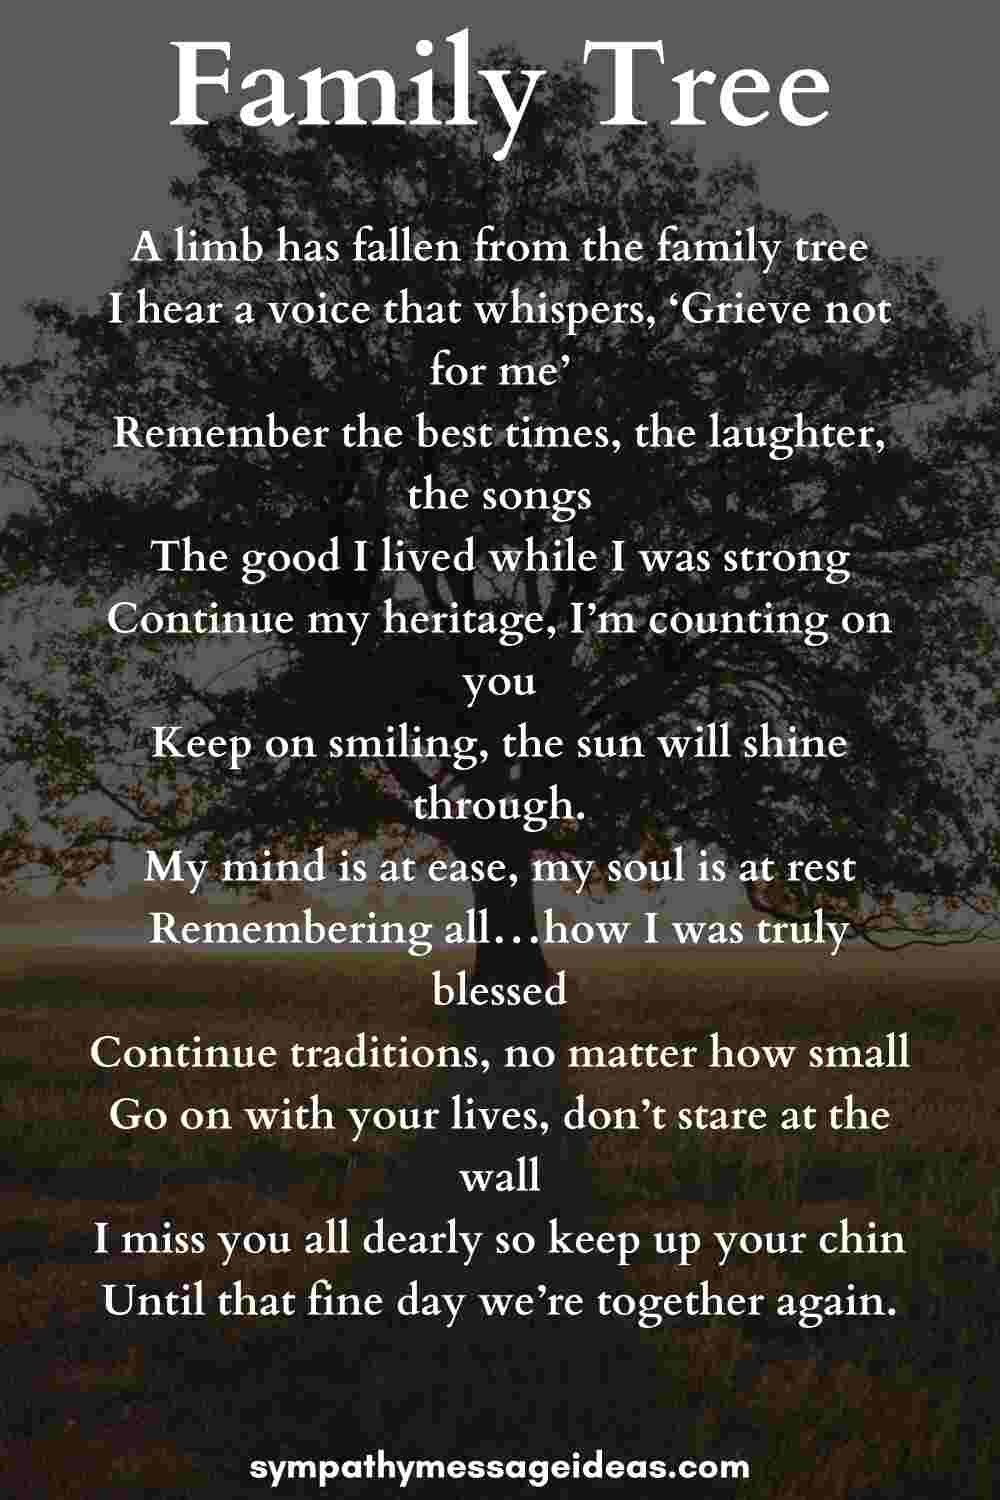 Grandpa Poems For Funeral